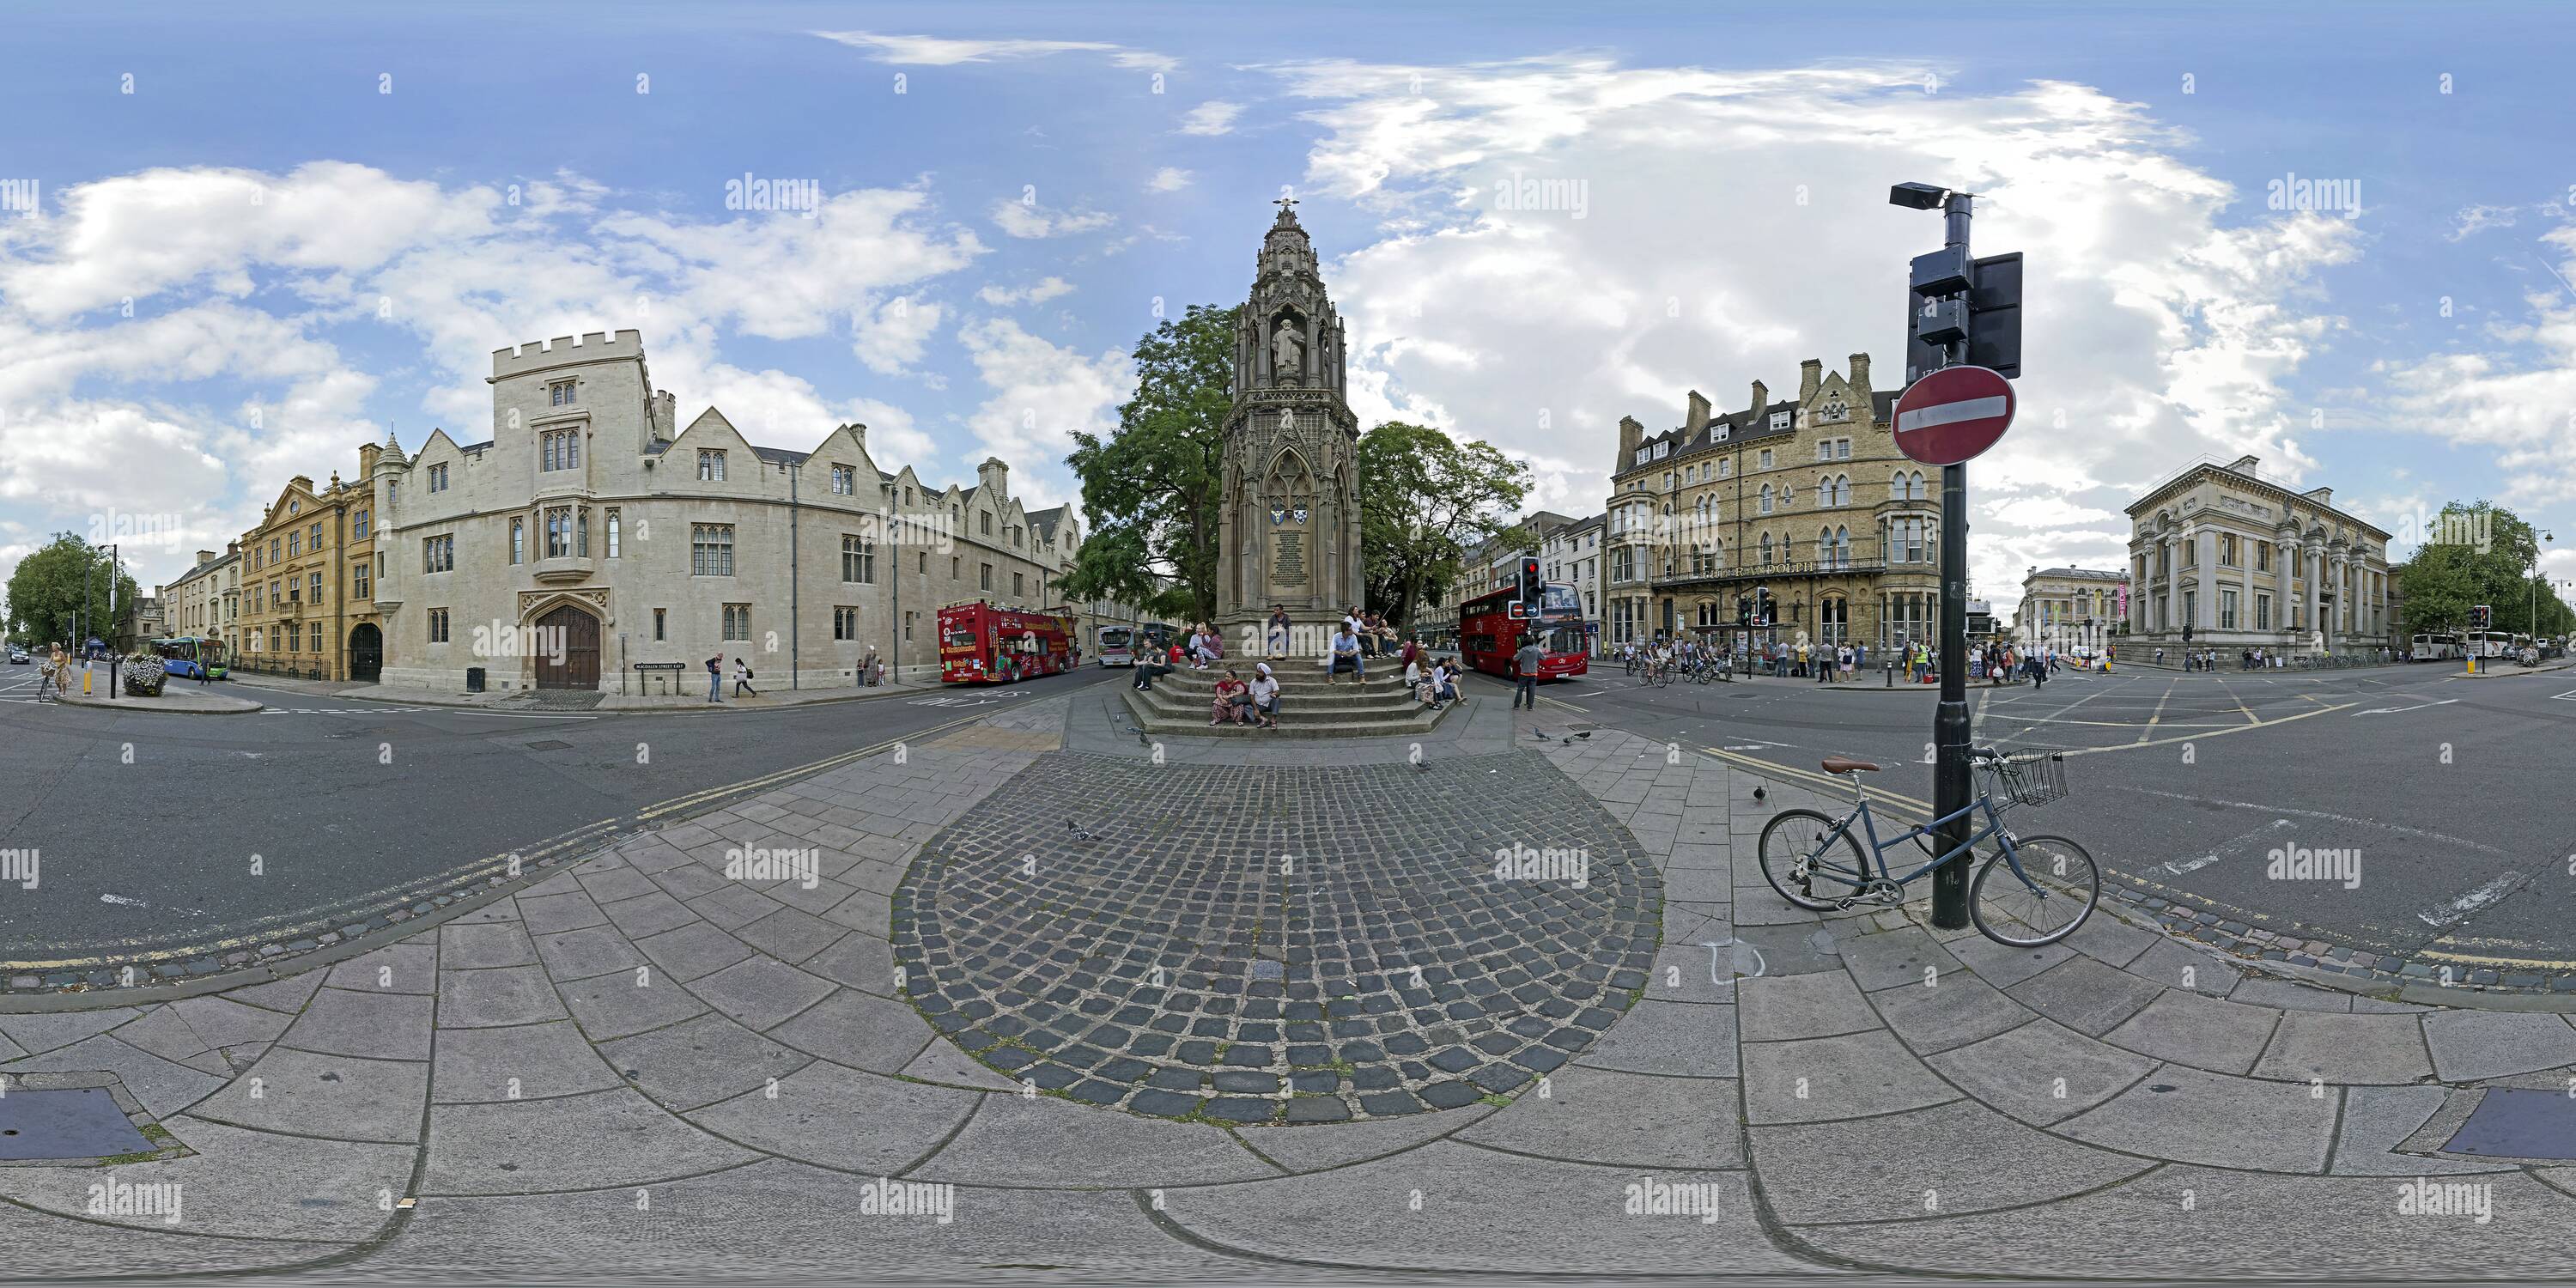 360 degree panoramic view of Oxford, Martyr's Memorial